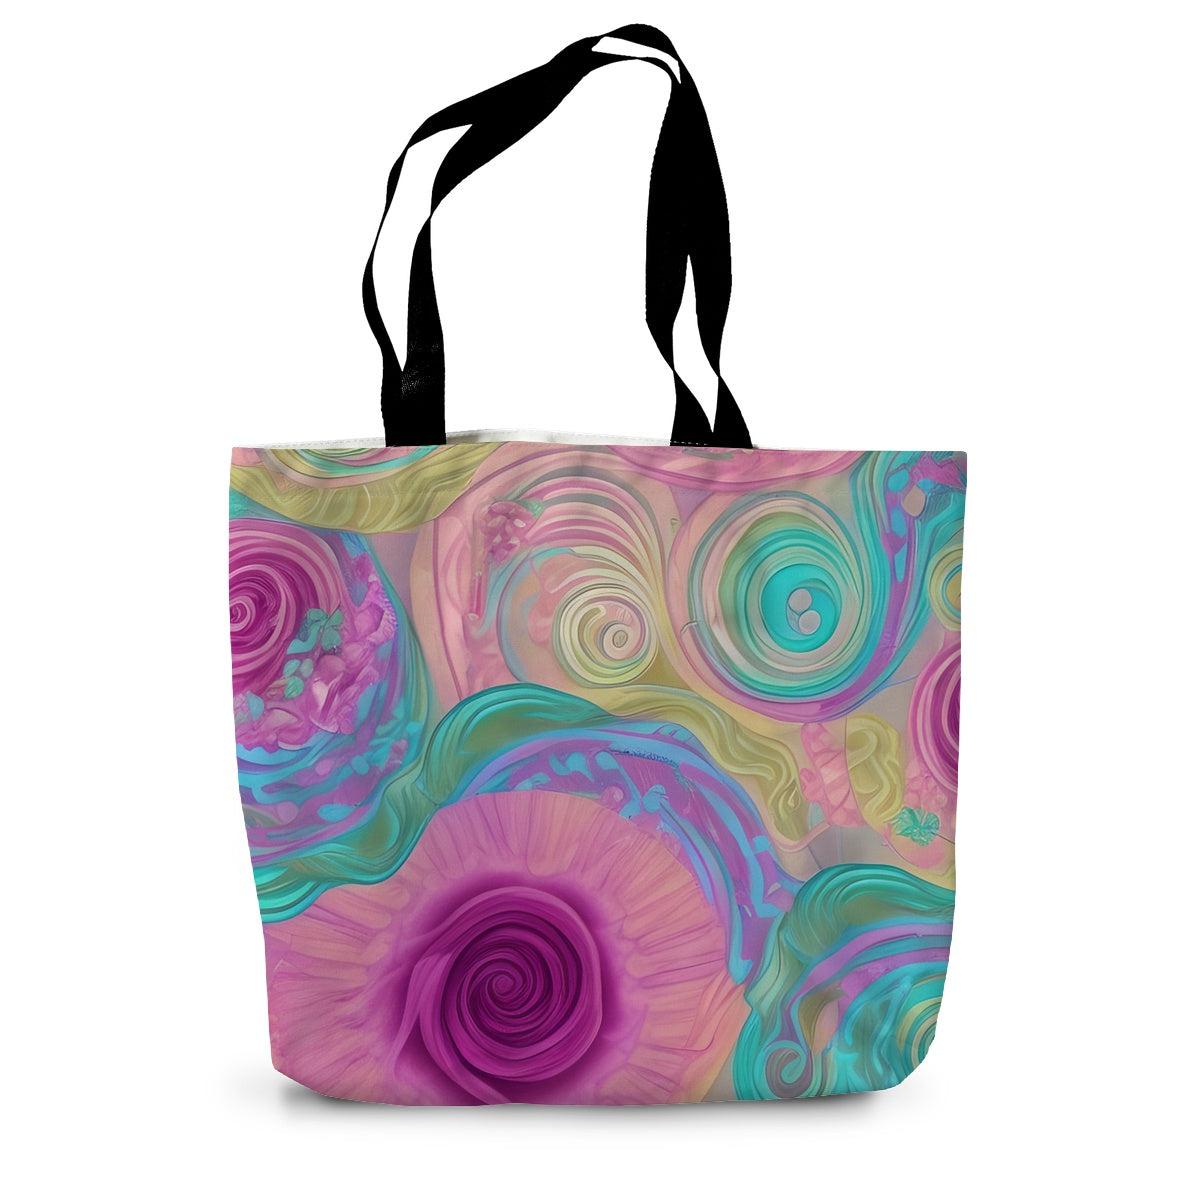 Pastel Lilac Mixed Floral Swirls Canvas Tote Bag